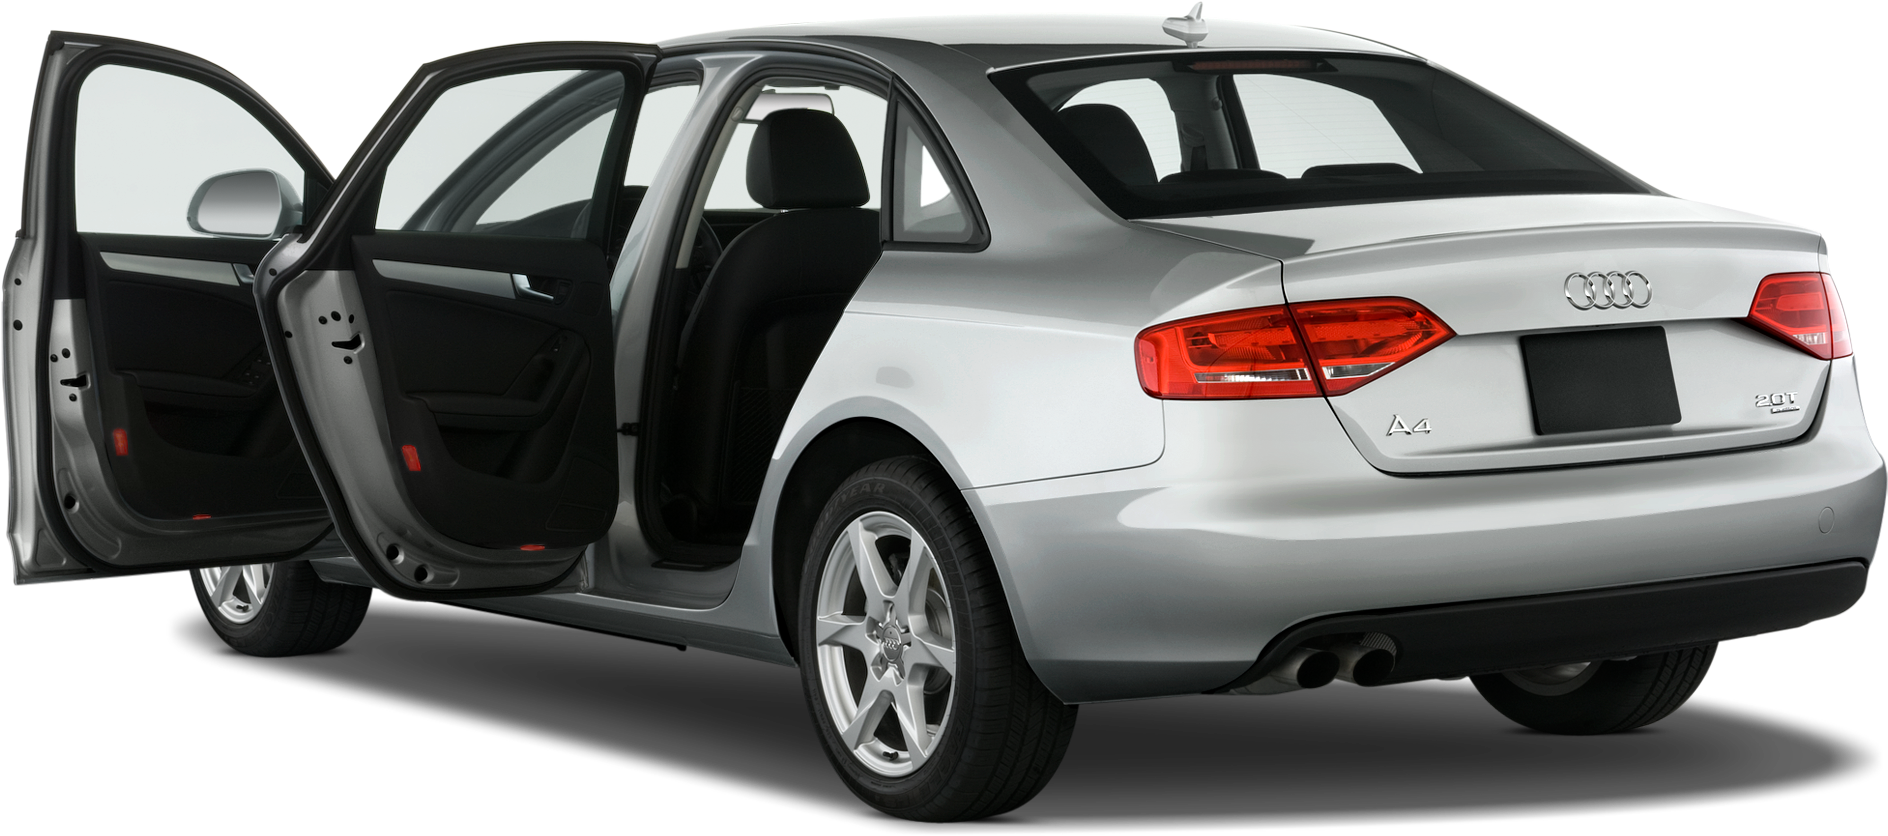 Silver Audi A4 Rear Viewwith Open Doors PNG